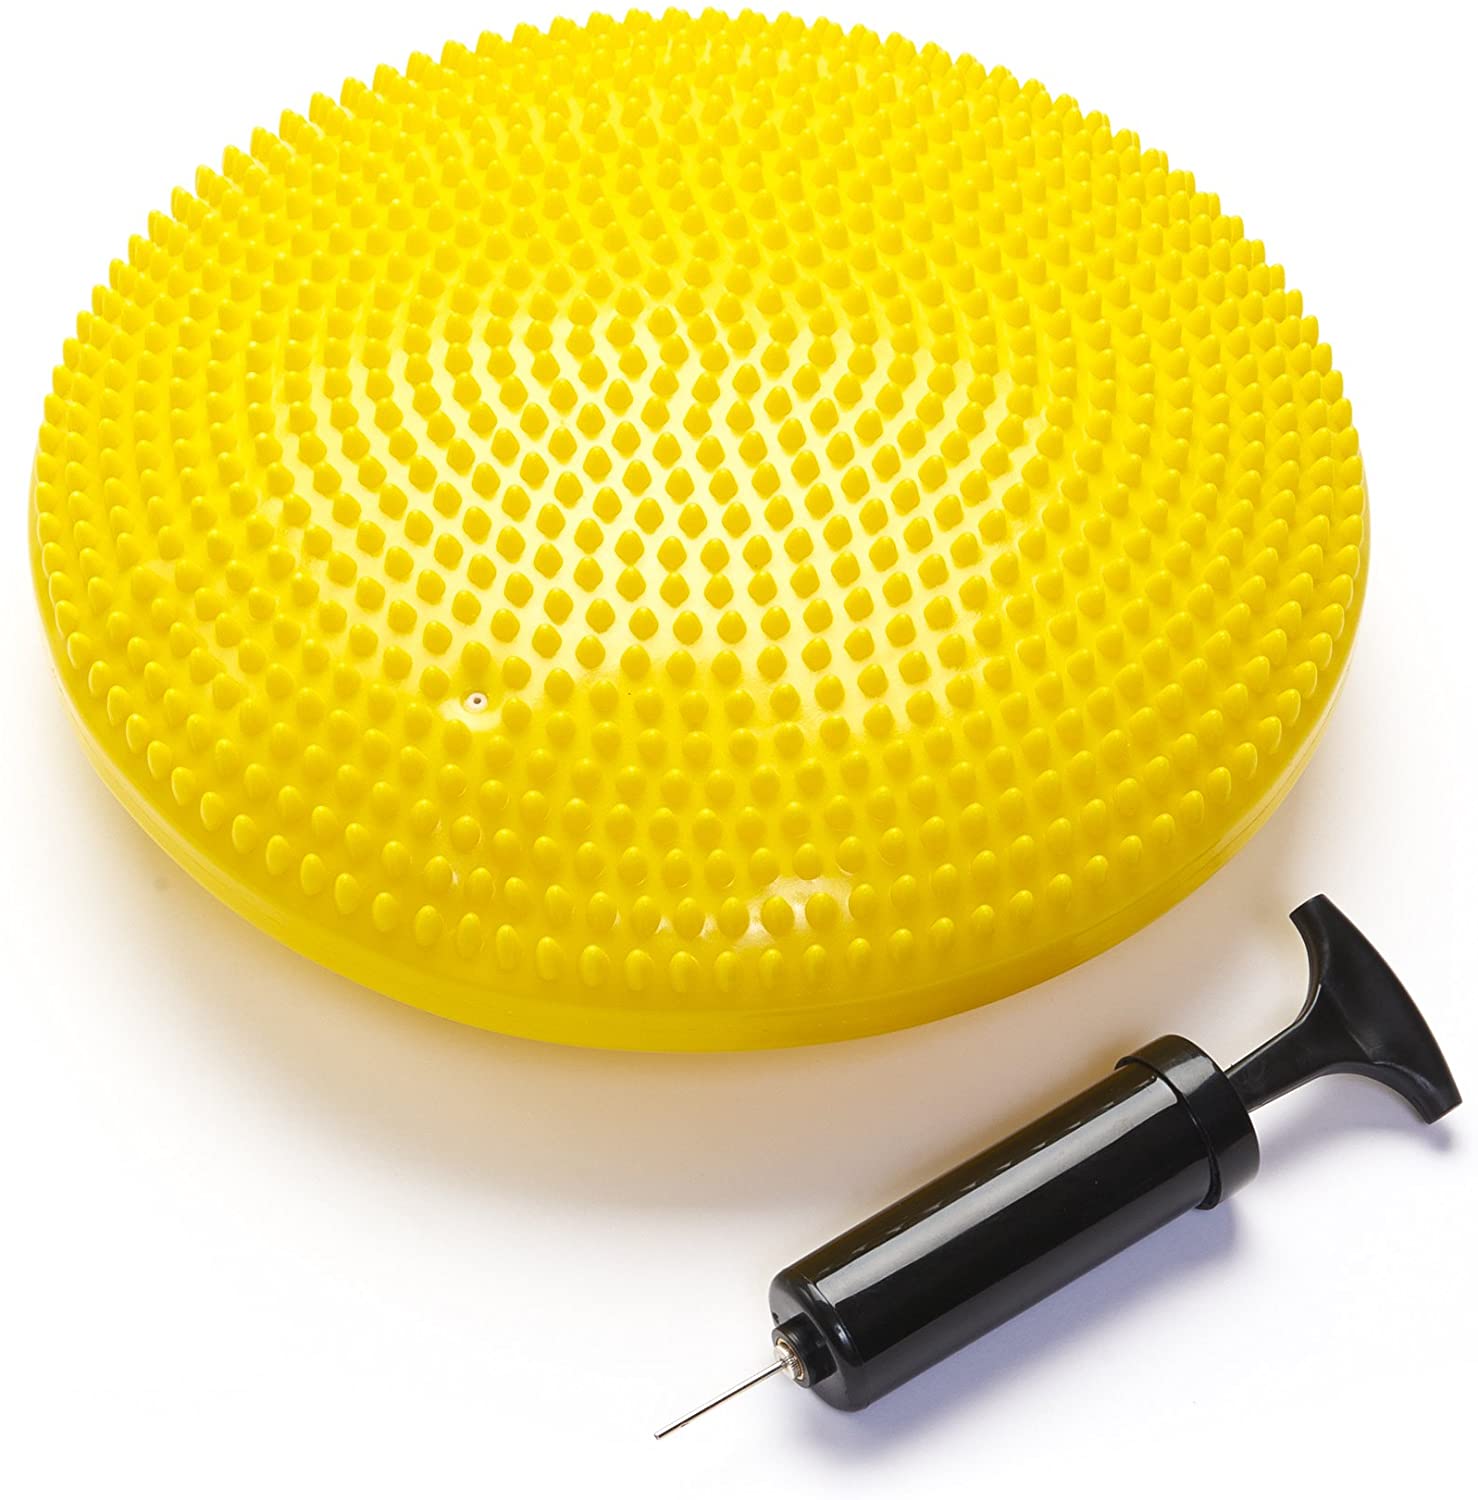 Black Mountain Products Exercise Balance Stability Disc w/ Hand Pump (Yellow) 6.49 $6.49